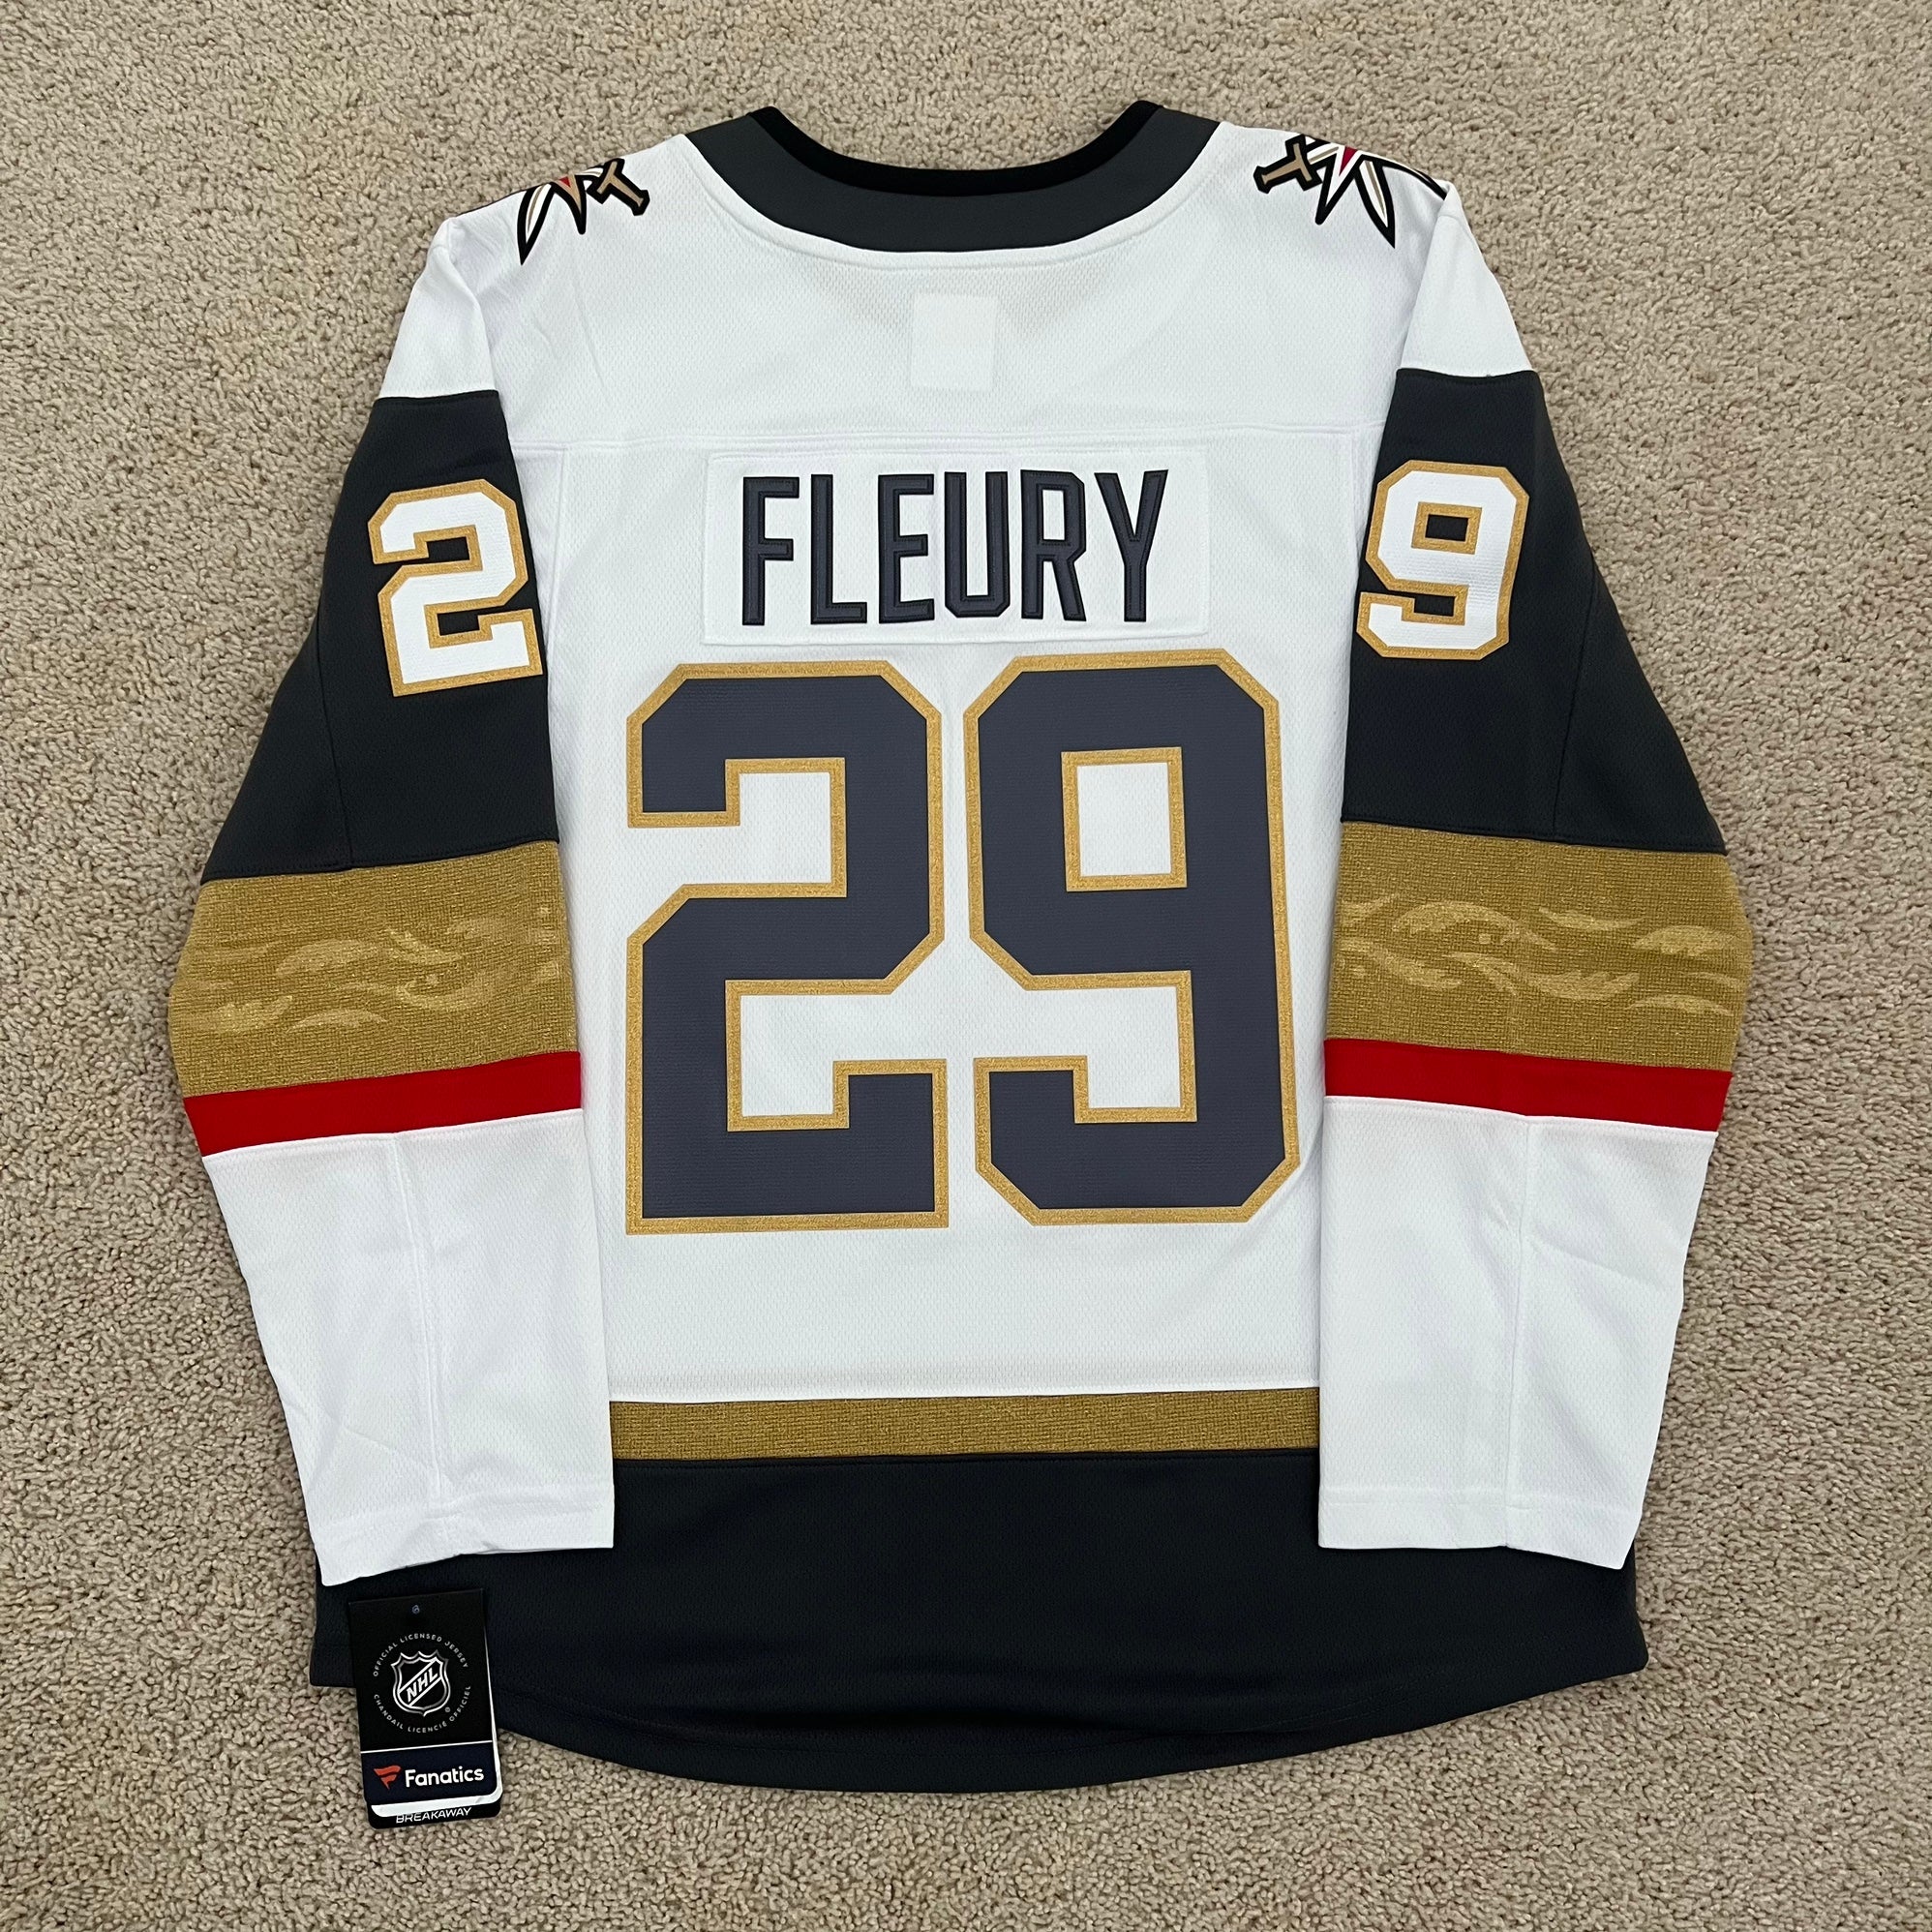 Vegas Golden Knights 2018 All Star #29 White Marc-Andre Fleury Jersey